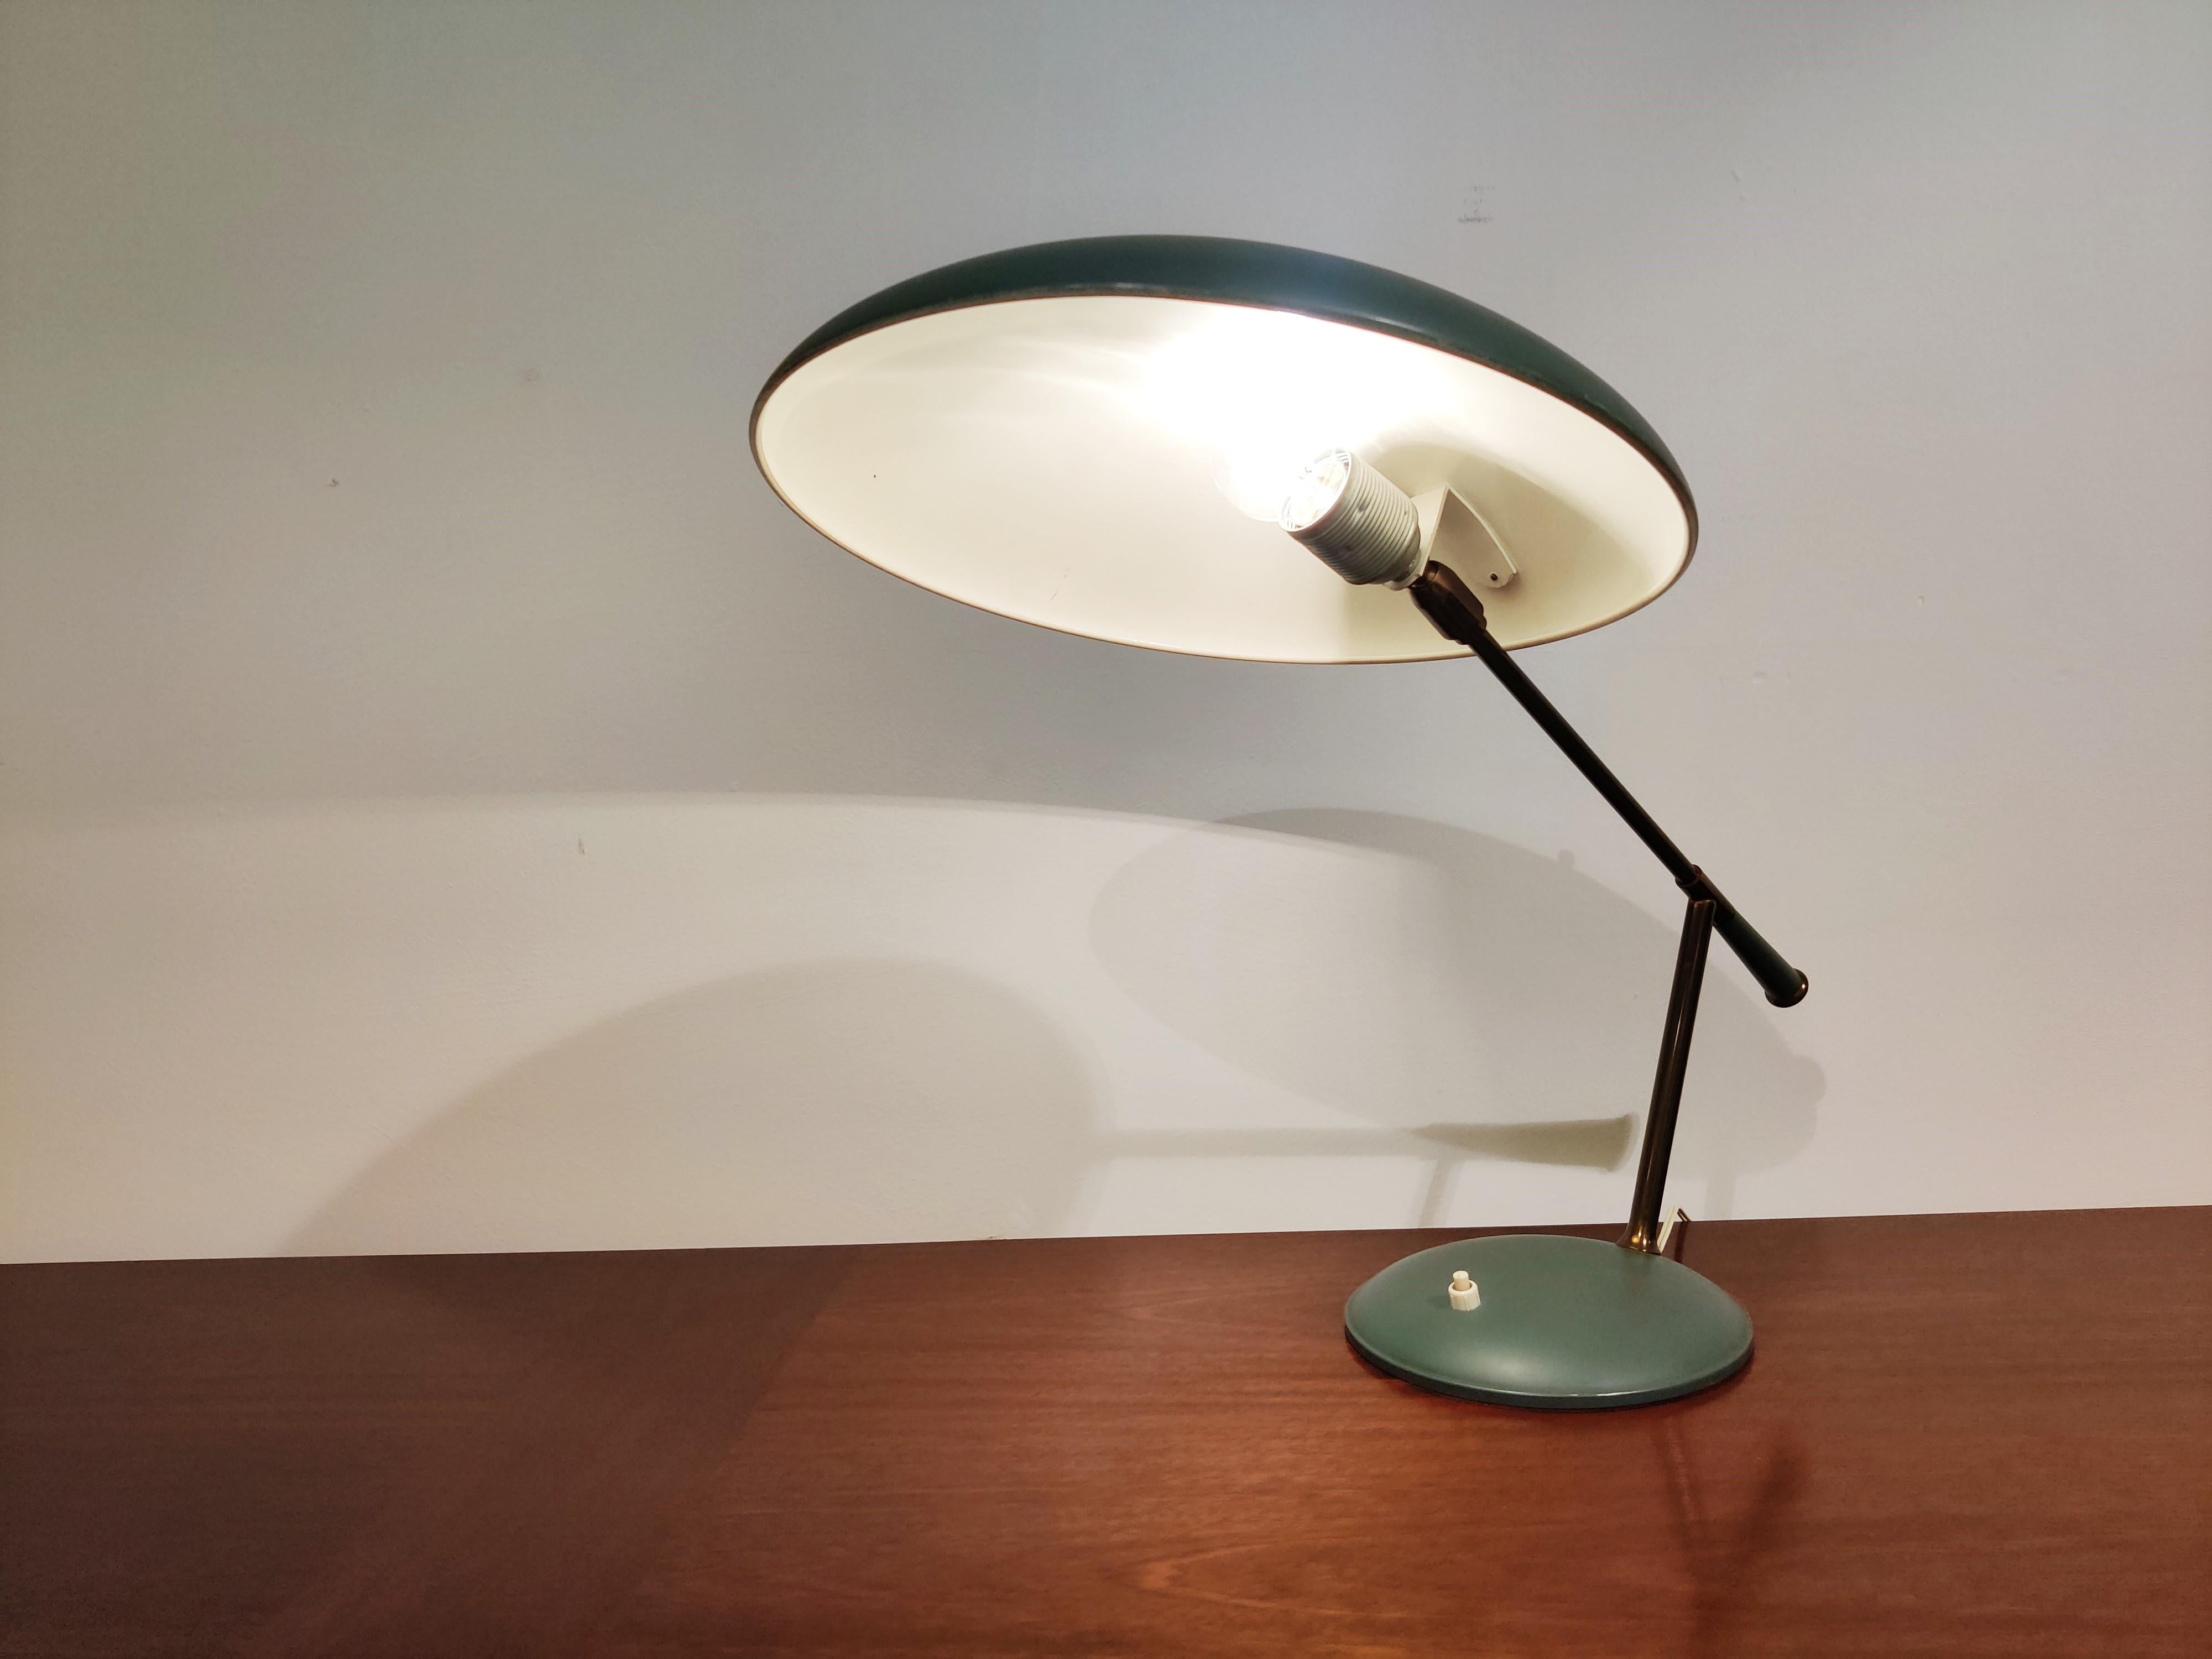 Rare desk lamp by Louis Kalff for Philips.

This midcentury table lamp has a beautiful design and is rather unique.

Louis Kalff made some famous designs like the Timor desk lamp or the 'z' shaped desk lamp.

The angle of the shade is